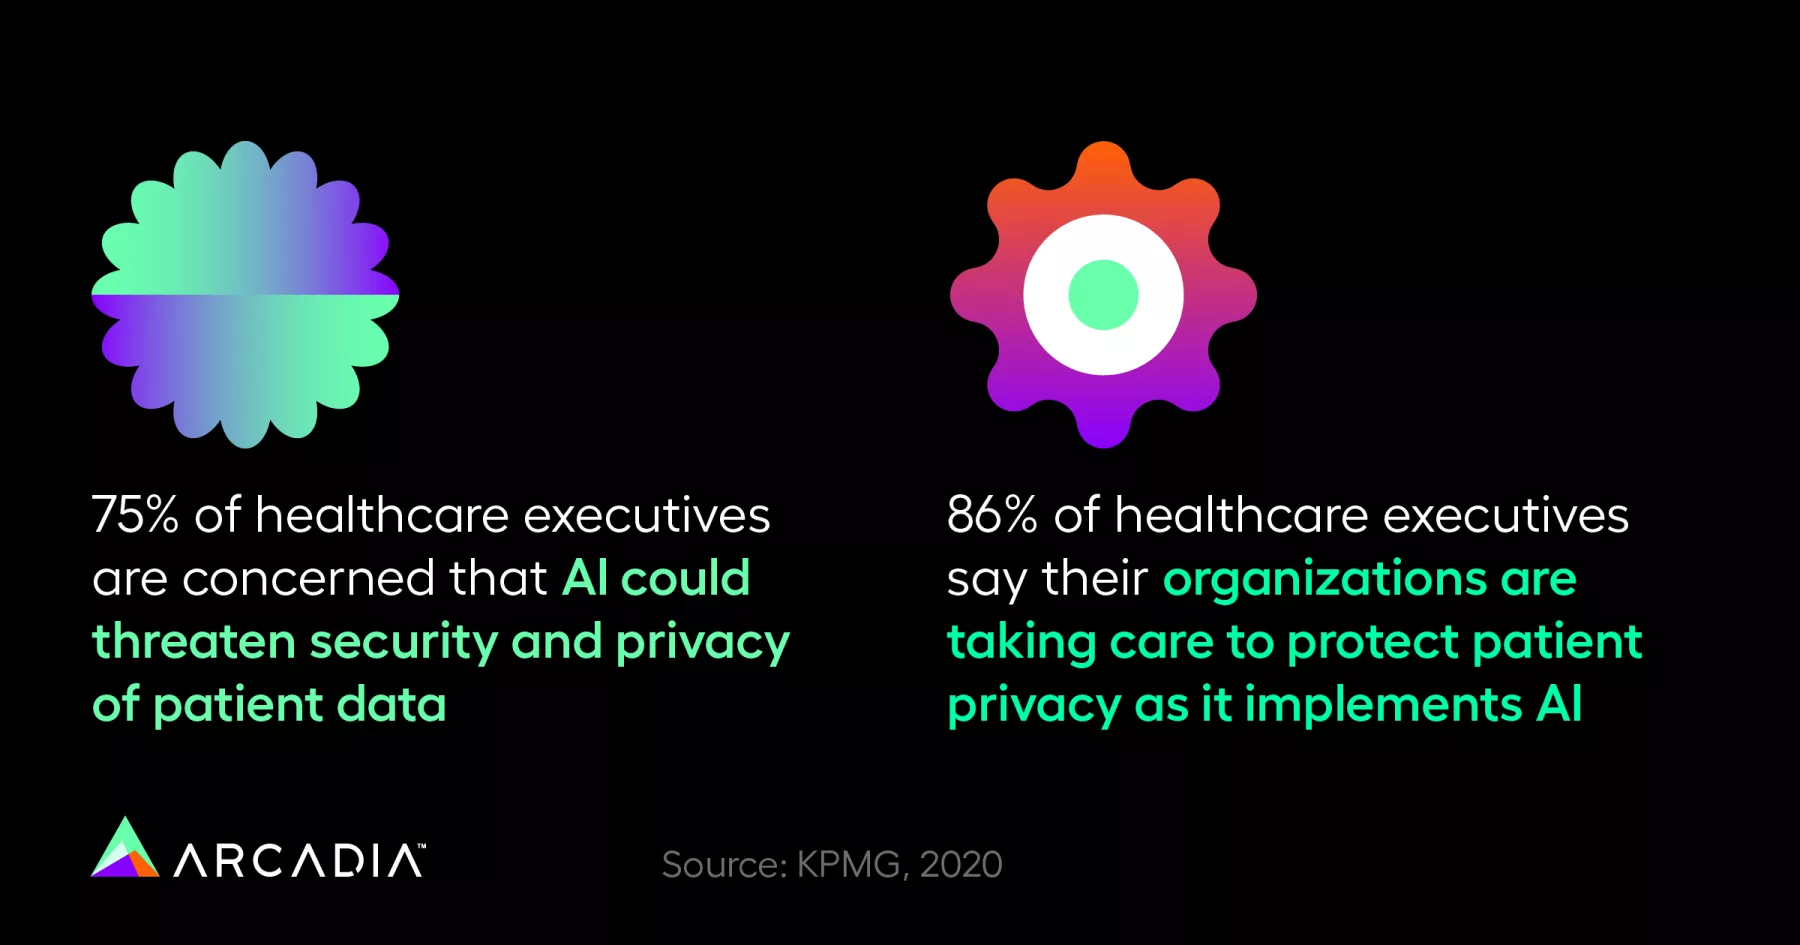 75% of healthcare executives are concerned that AI could threaten security and privacy of patient data while 86% say their organizations are taking care to protect patient privacy as it implements AI.